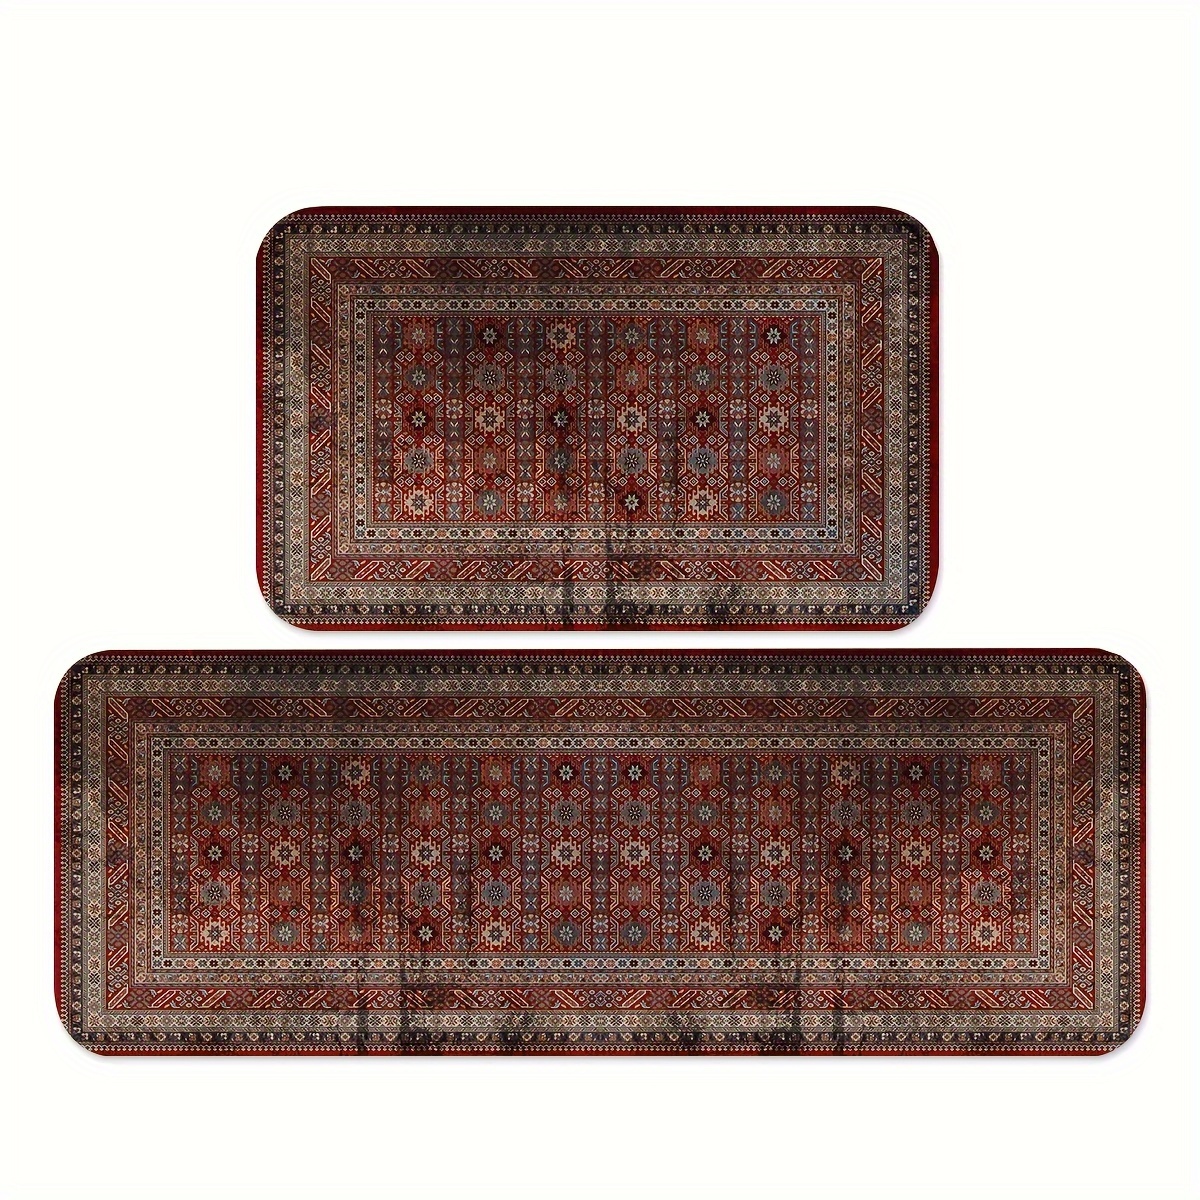 

1/2pcs Oriental Style Kitchen Mats, Vintage Coffee Table Throw Cushions, Anti-skid Absorbent Bathroom Carpets, Rugs For Home Sink Laundry Room Spring Decor Gift Farmhouse Hotel Foyer, Sets 2 Piece